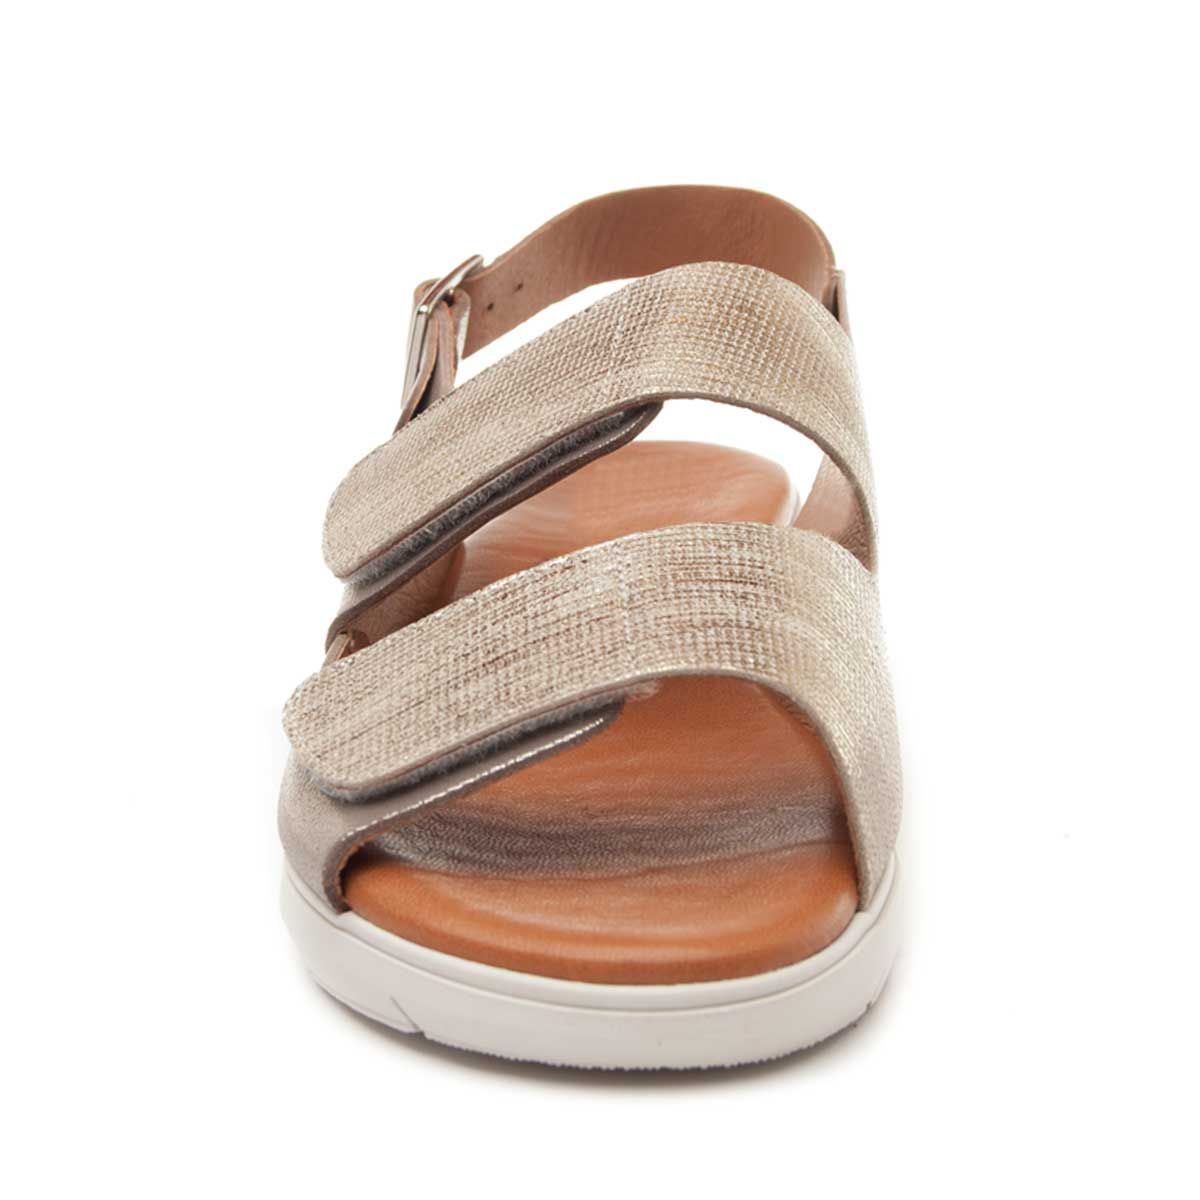 These new sandals meet everything you need to make your summer perfect. Perfect combination between quality, community and design. Manufactured 100% in leather, with padded plant also made of skin and non-slip and light polyurethane sole, nothing weigh. Its combinations of colors and textures make these sandals unique pieces very top and easy to combine. Natural, ergonomic, flexible, footprint effect, soft, absorbing, breathable, shock Absorbing, lightweight and non-slip..description Technical: External materialTural LeatherMaterial Interior: Natural Leather.Material Plant: Natural Leather.Material Sole: Polyurethane. .Atura Platform: 0.Ture Heon: 0.Ture Bag0.Proofundity Bag